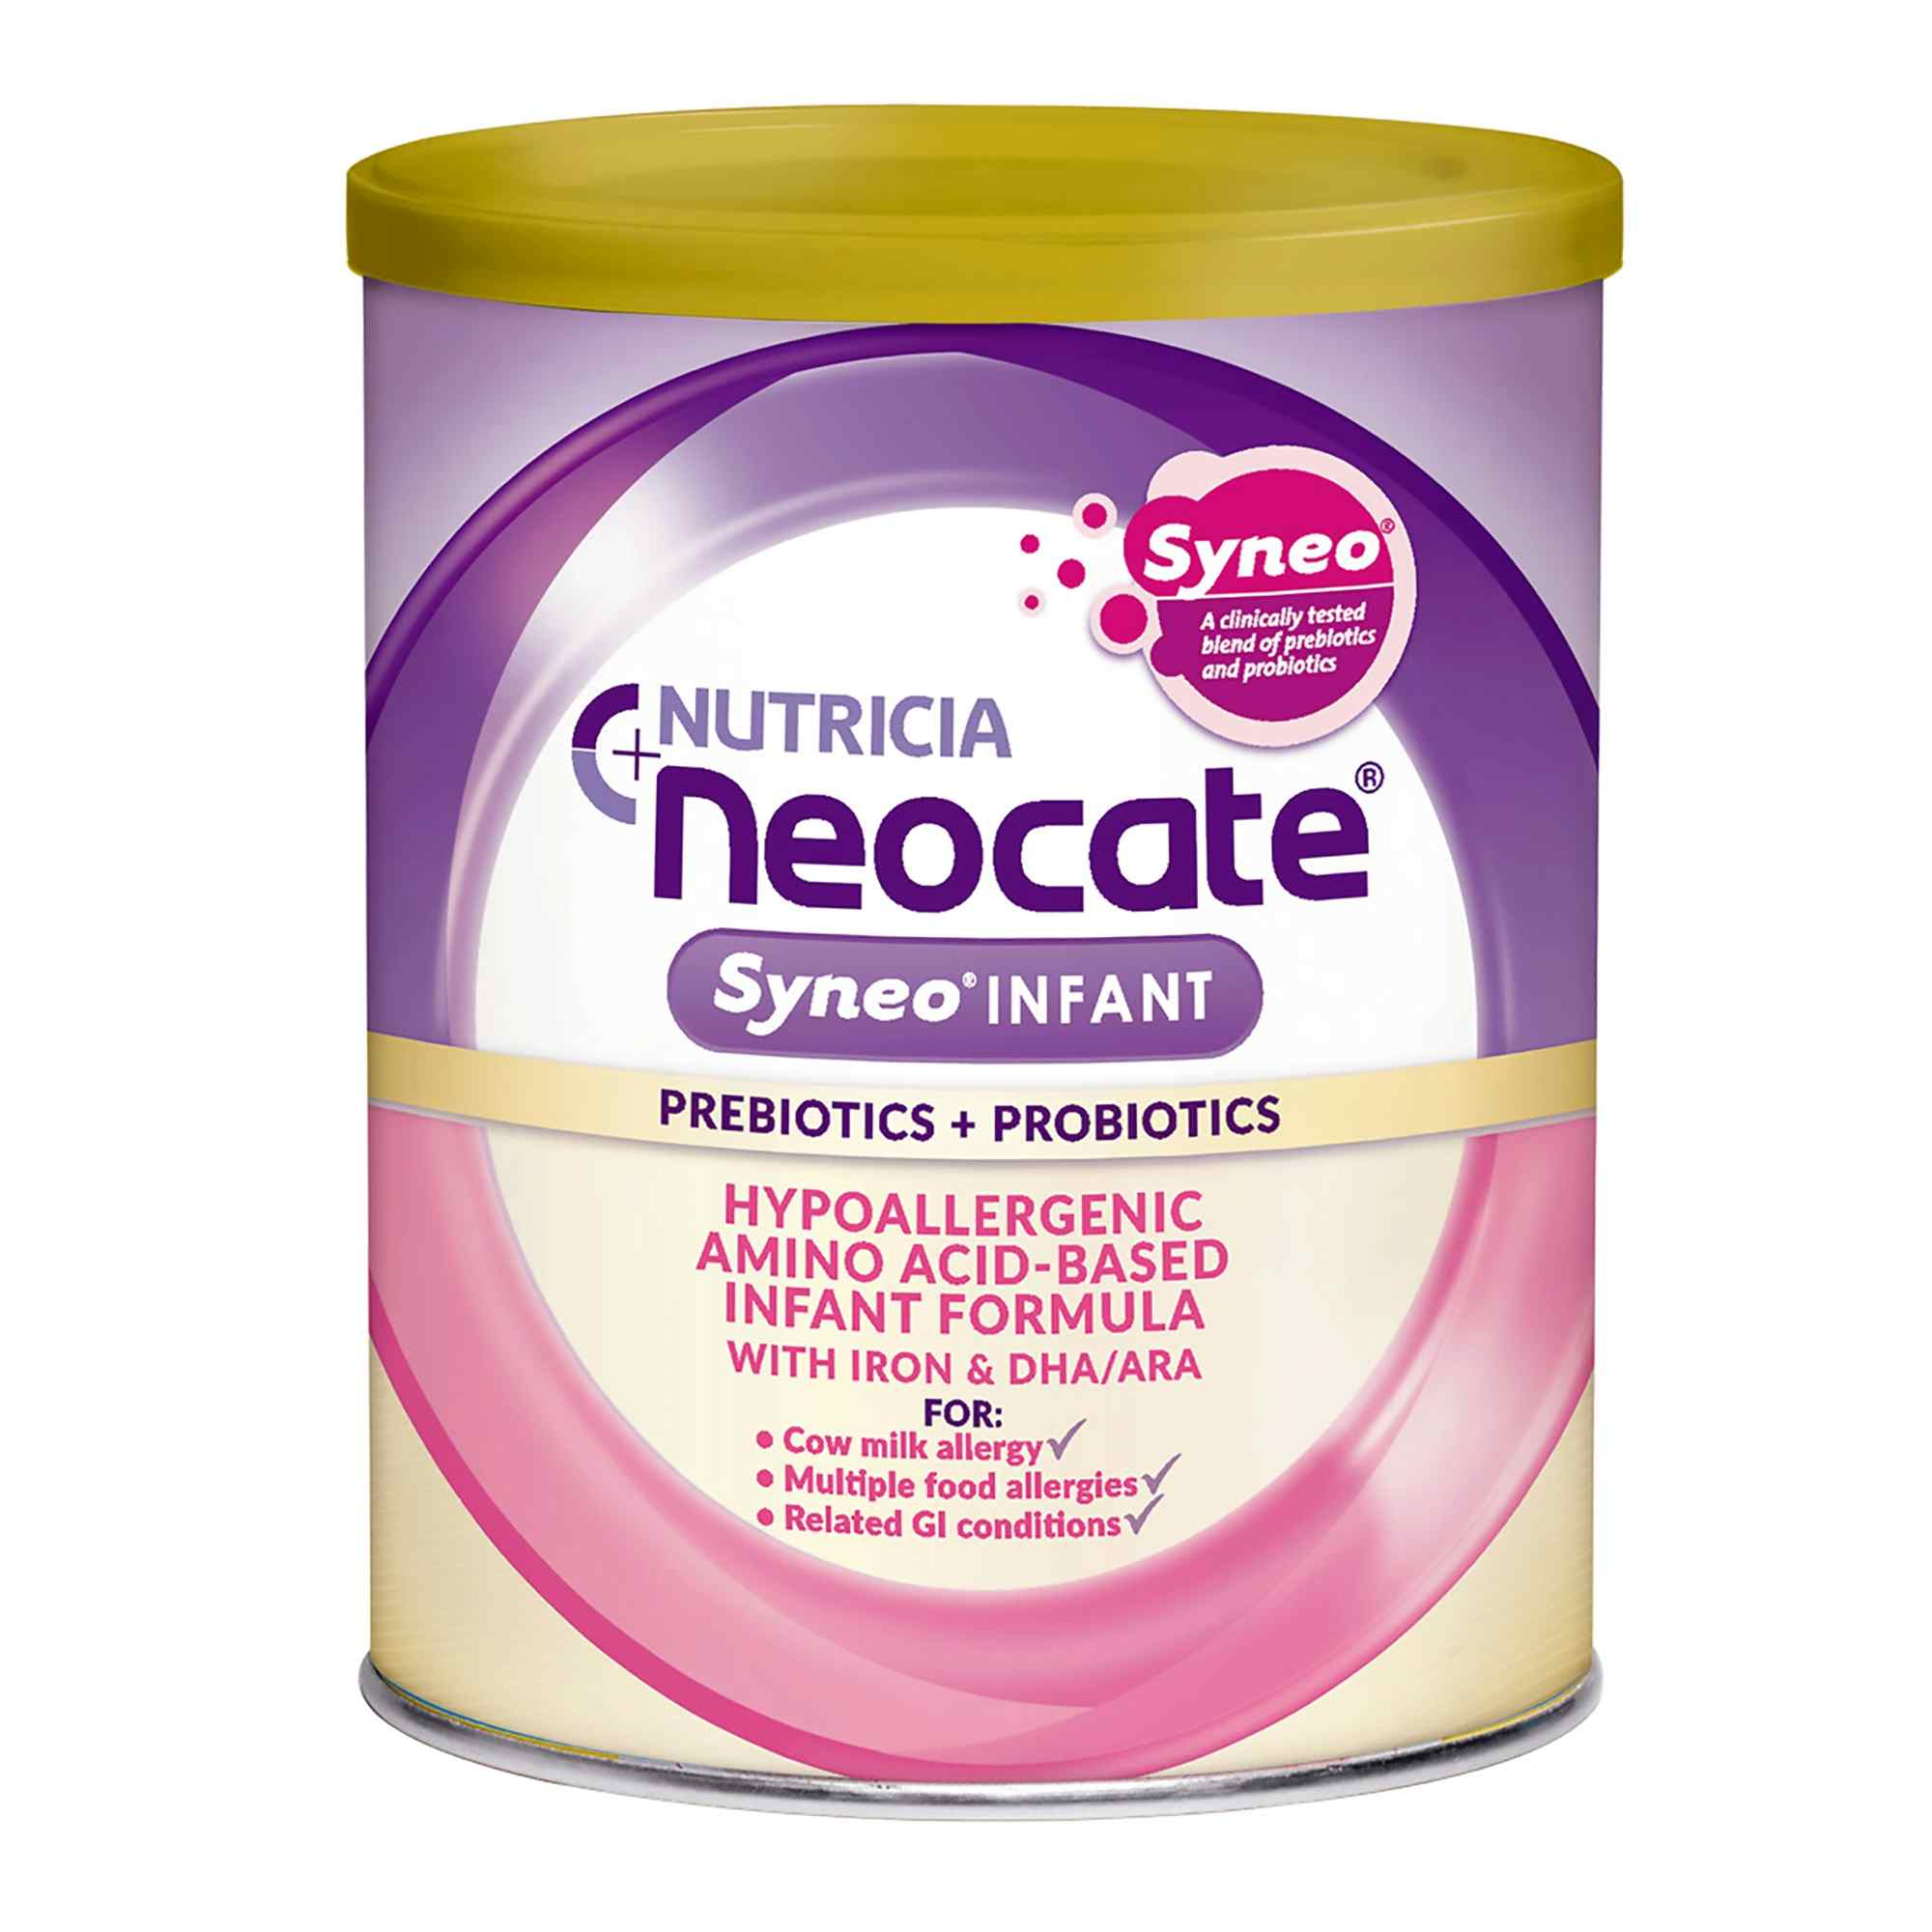 Nutricia Neocate Syneo Infant Hypoallergenic Amino-Based Infant Formula, 14.1 oz.